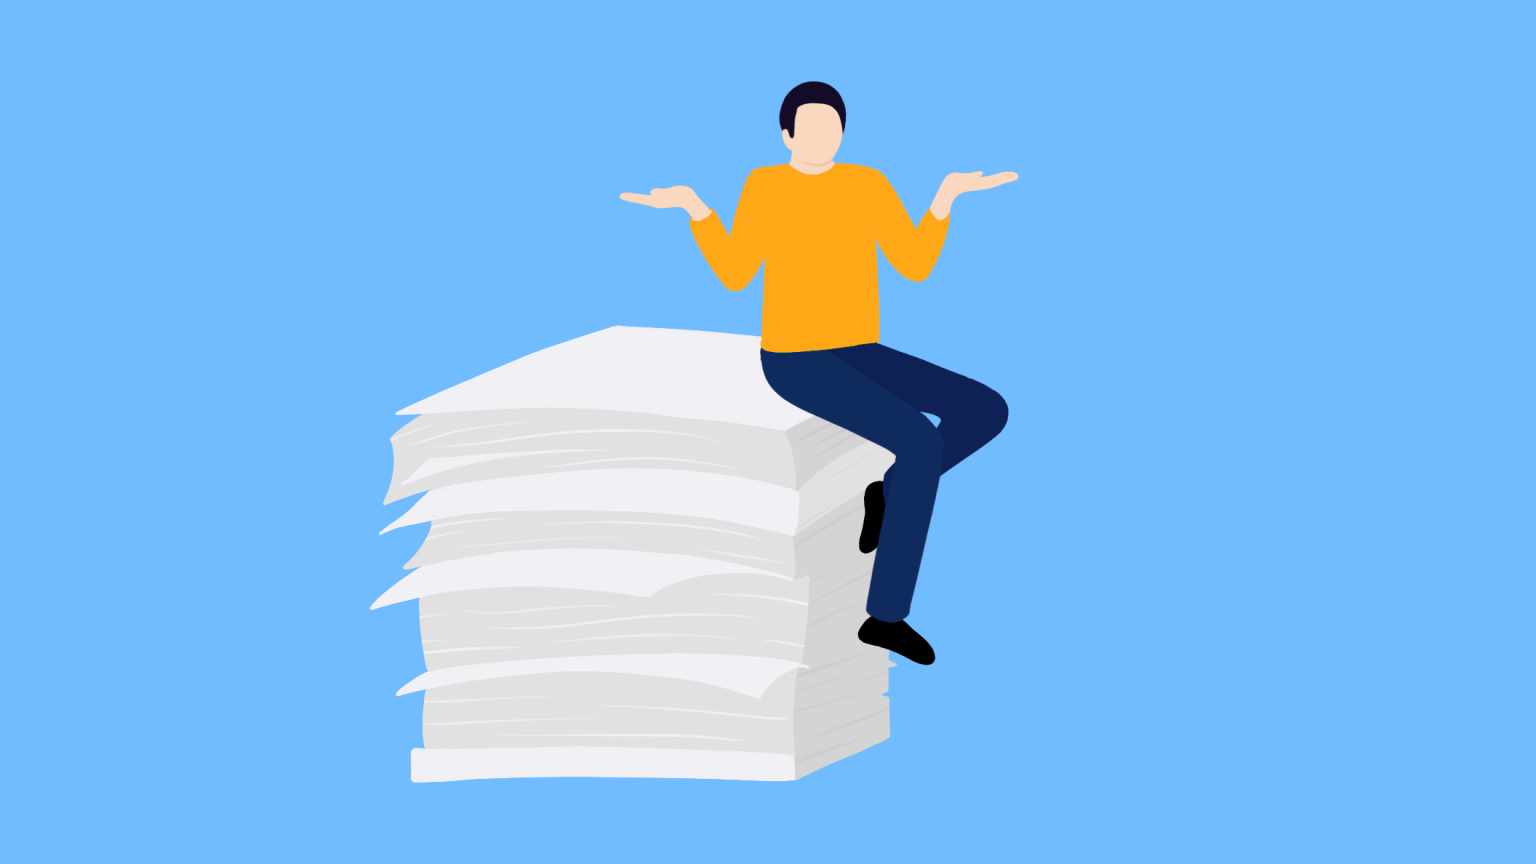 illustration of stack of papers with person on top